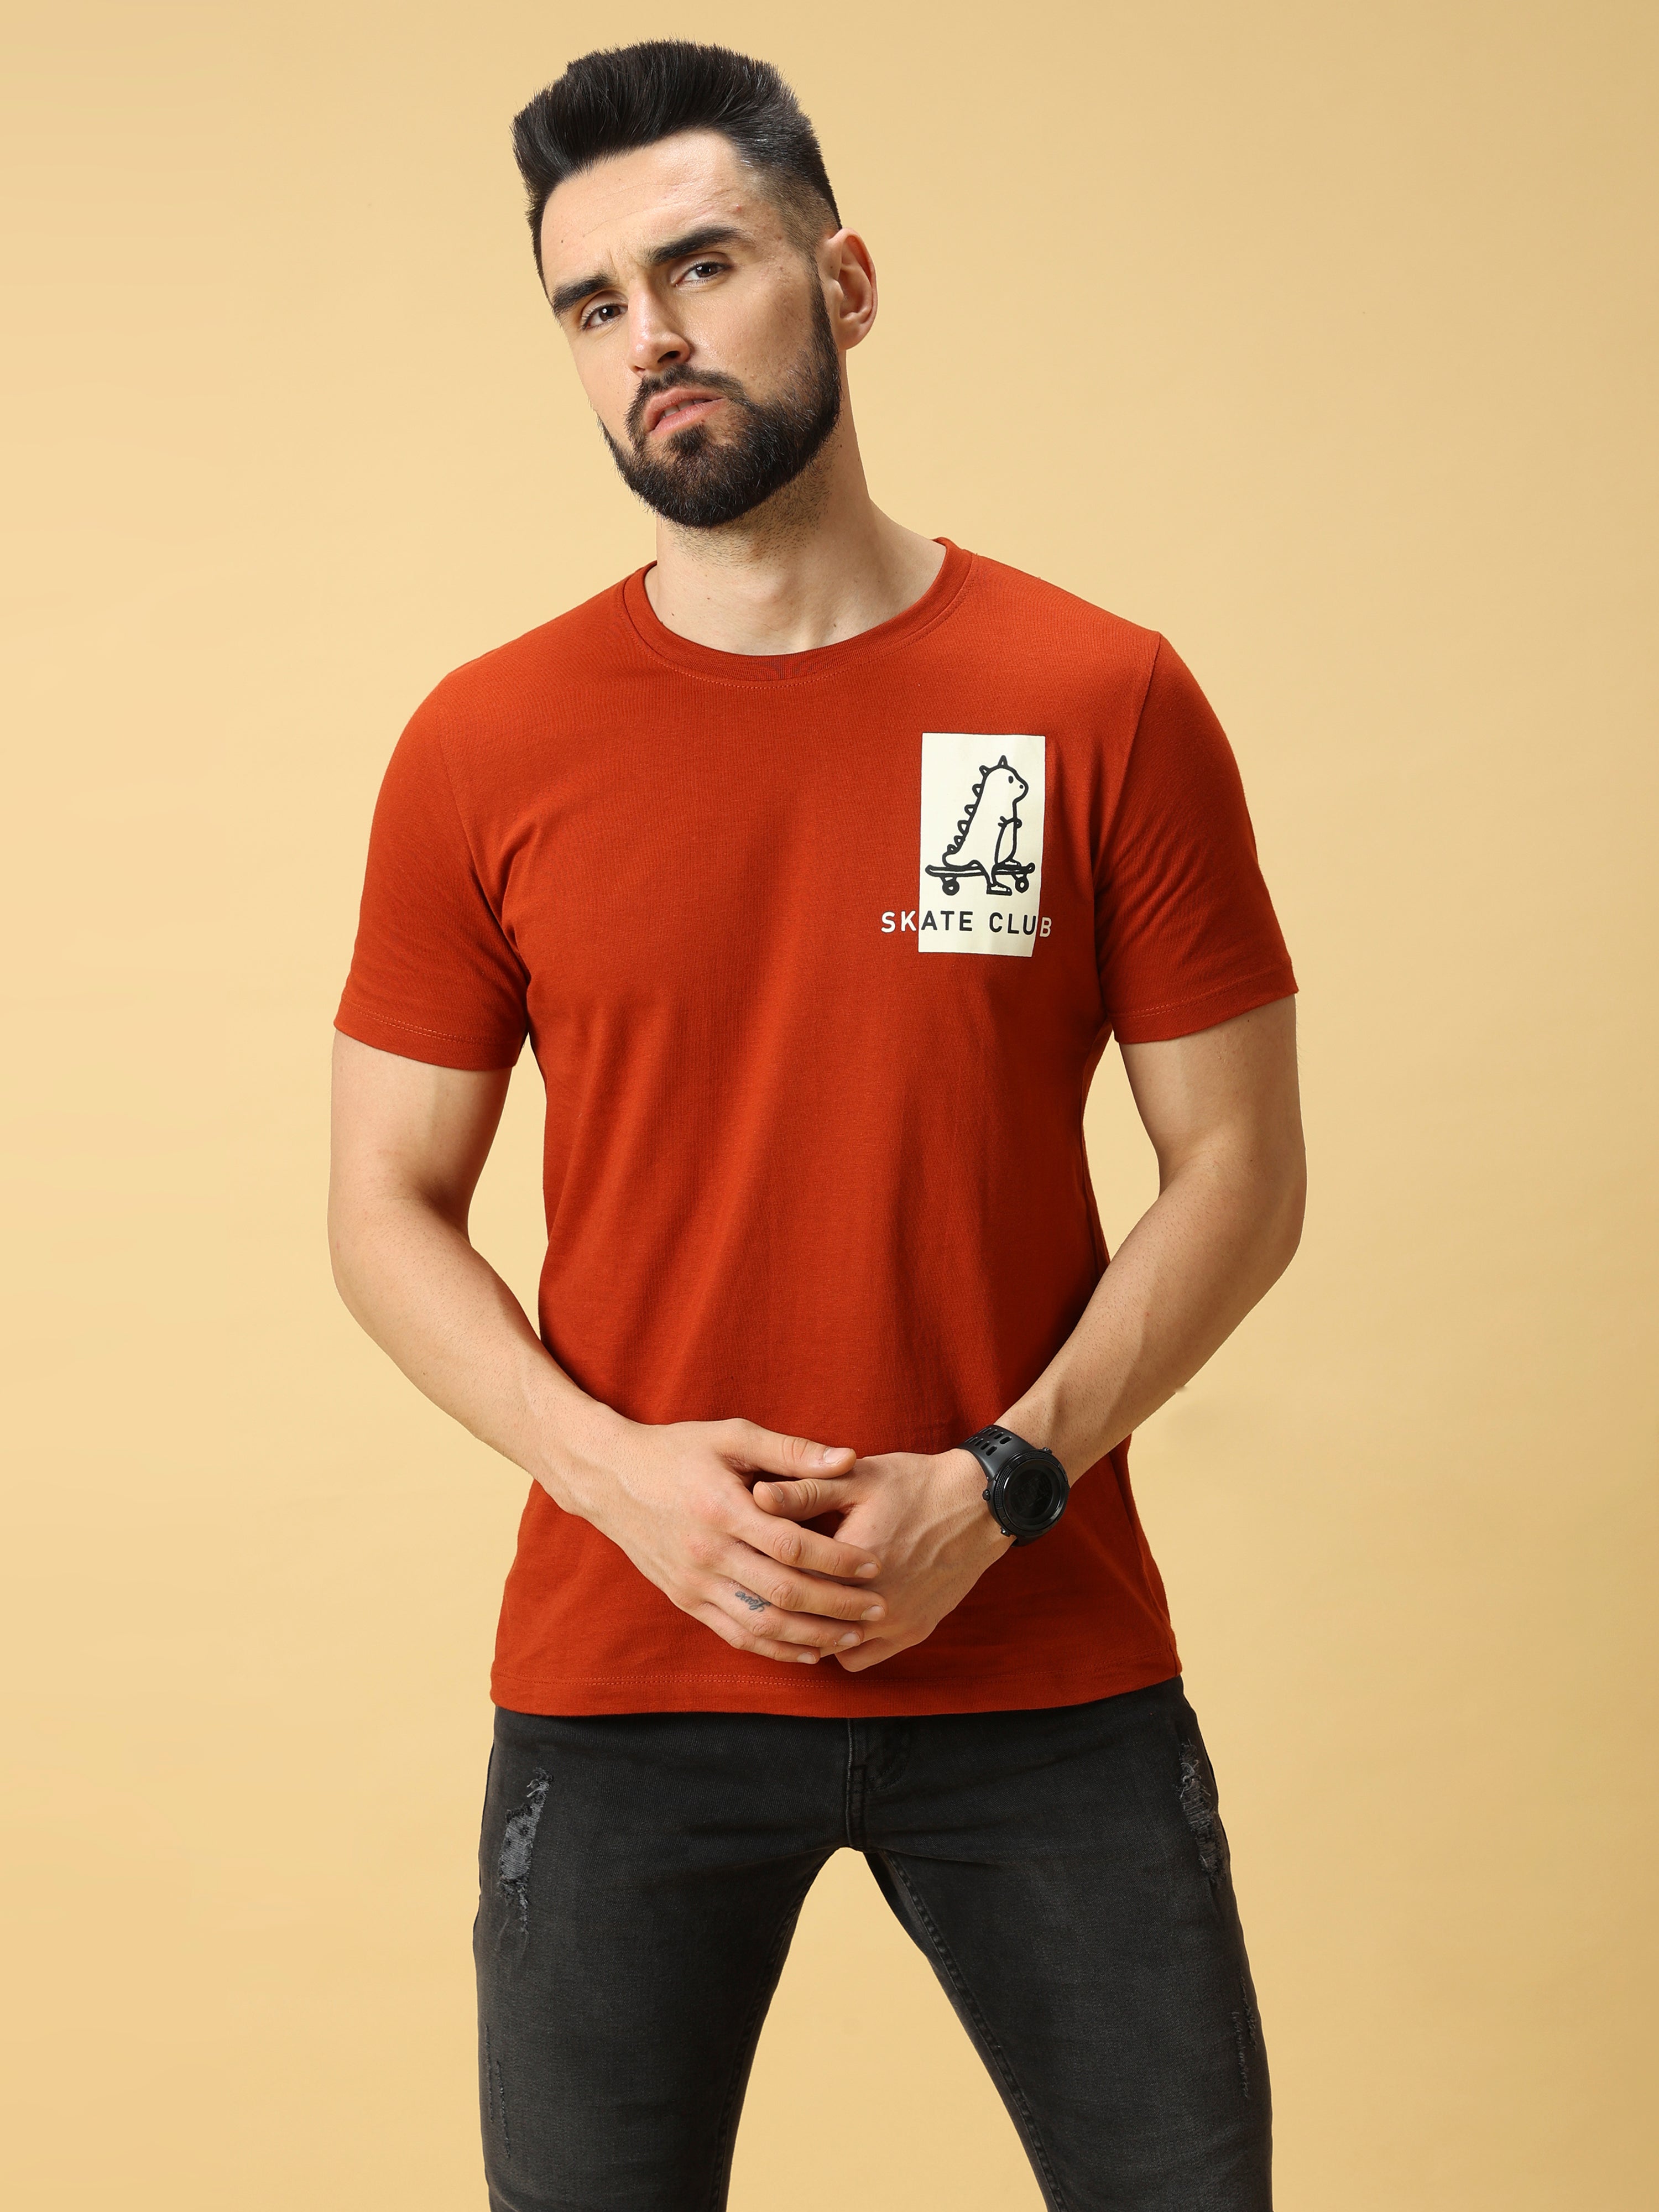 Skate Club Lt Cream Chest Print Crew Neck T-Shirt shop online at Estilocus. This pure cotton printed T-shirt is a stylish go-to for laidback days. Cut in a comfy regular fit. • 100% Cotton knitted interlock 190GSM• Bio washed fabric• Round neck T-shirt •